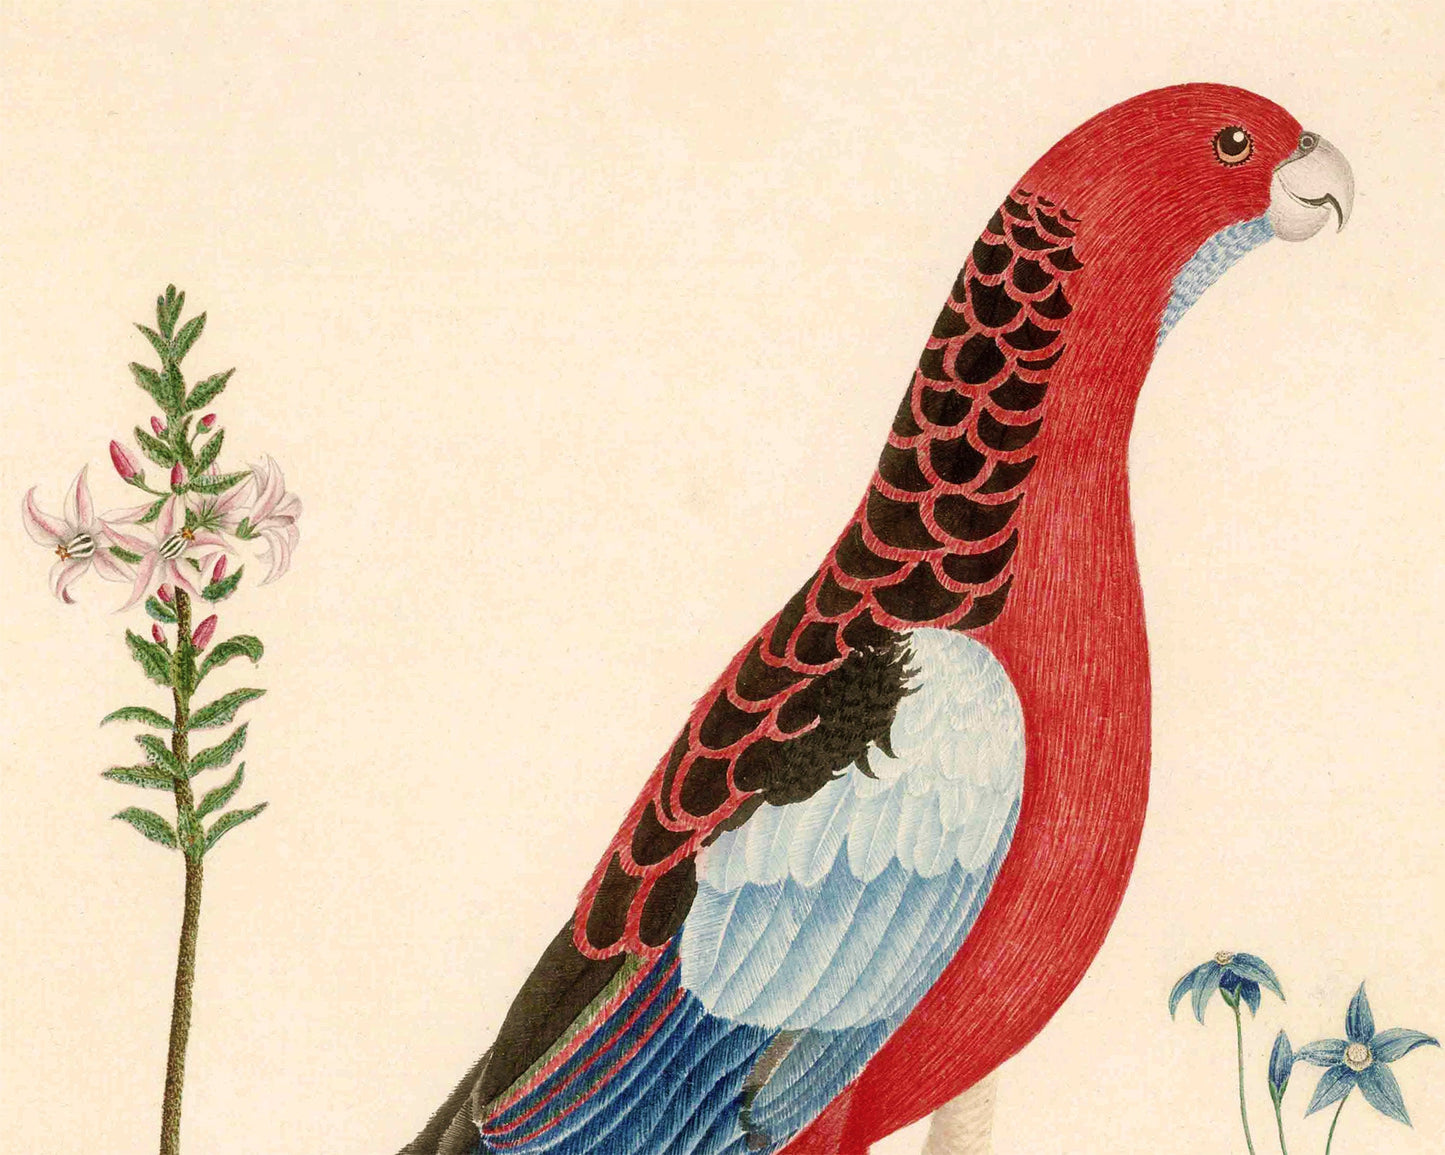 Antique parrot and flower art | 18th century bird and plants | Natural history print | Animal décor | Modern vintage | Eco-friendly gift